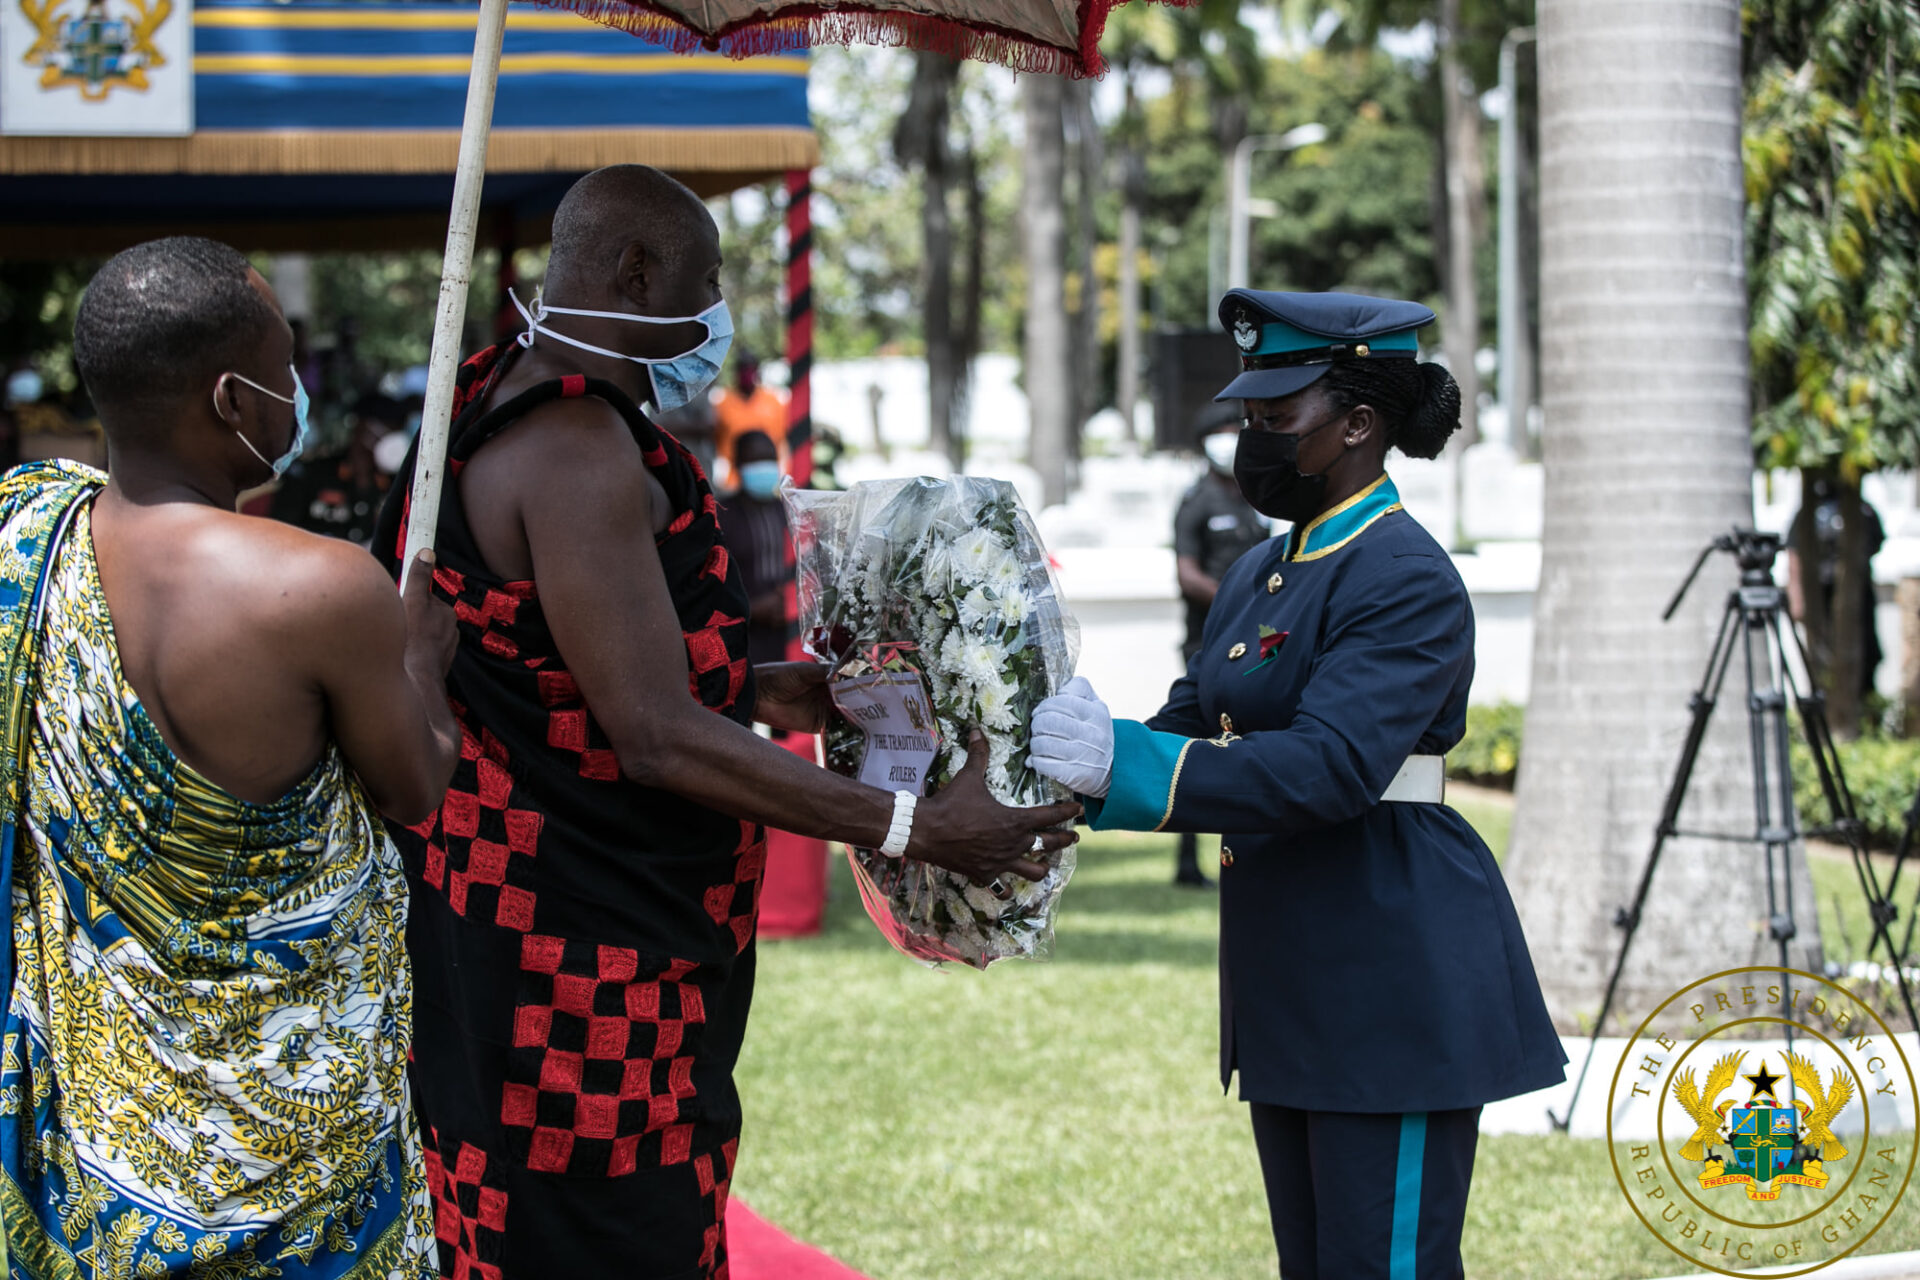 On Wednesday, 11th November 2020, HRM Nii Okwei Kinka Dowuona Vi and President Nana Addo Dankwa Akufo-Addo joined the Veterans Association of Ghana to commemorate Remembrance Day, at a brief event at the Christiansborg War Cemetery